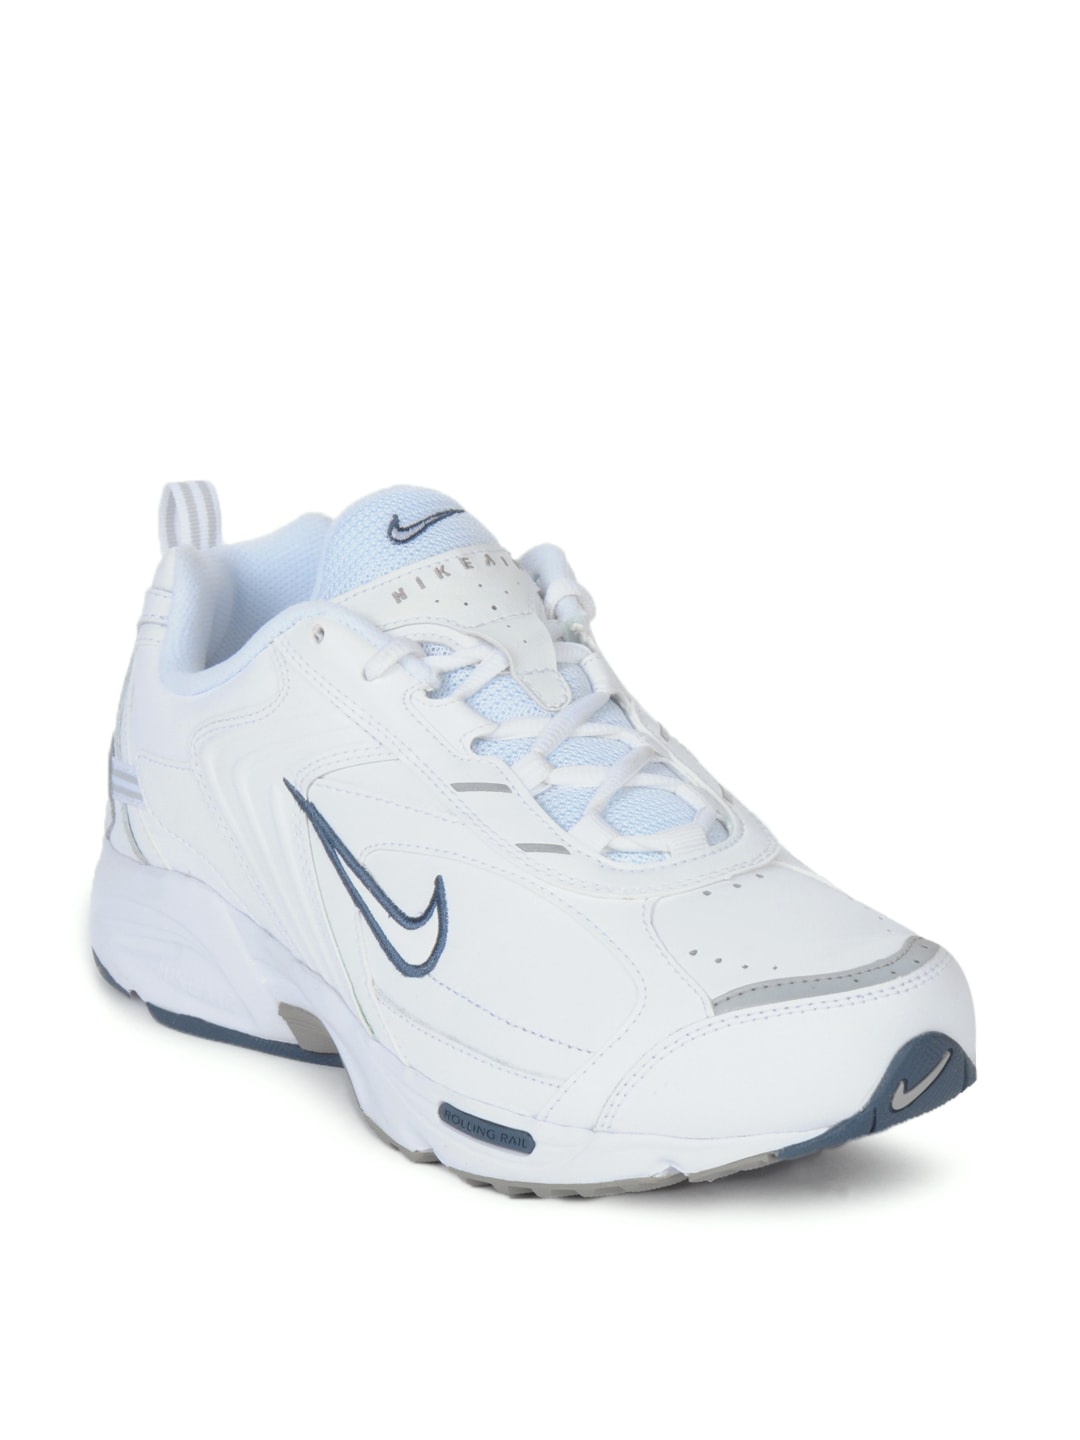 Nike Men Air Impel Leather Sports Shoes